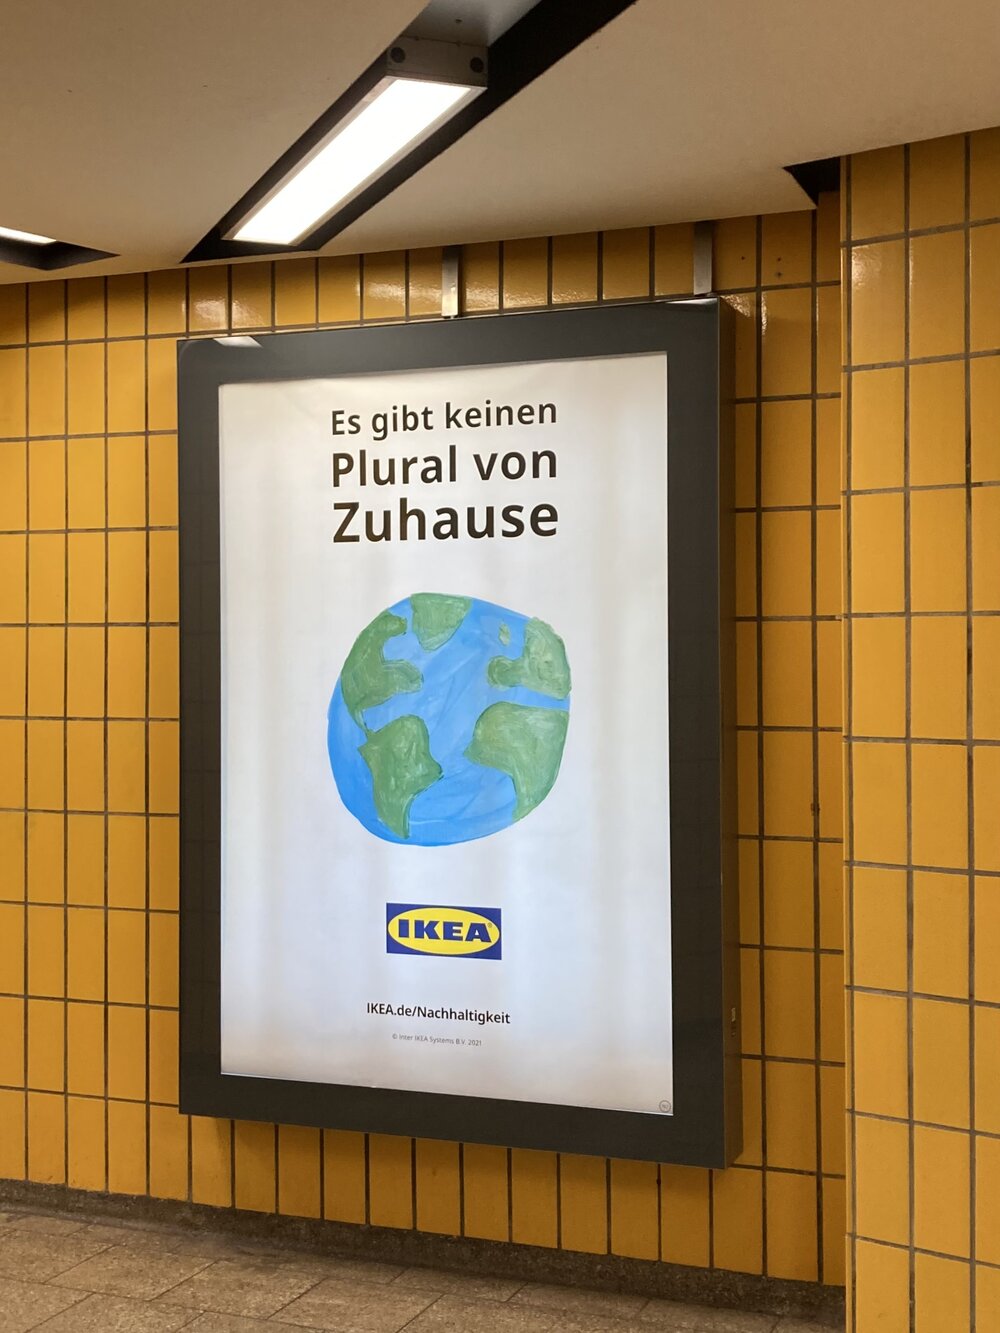 Why is IKEA cute globes their posters? TEMA MAGAZINE